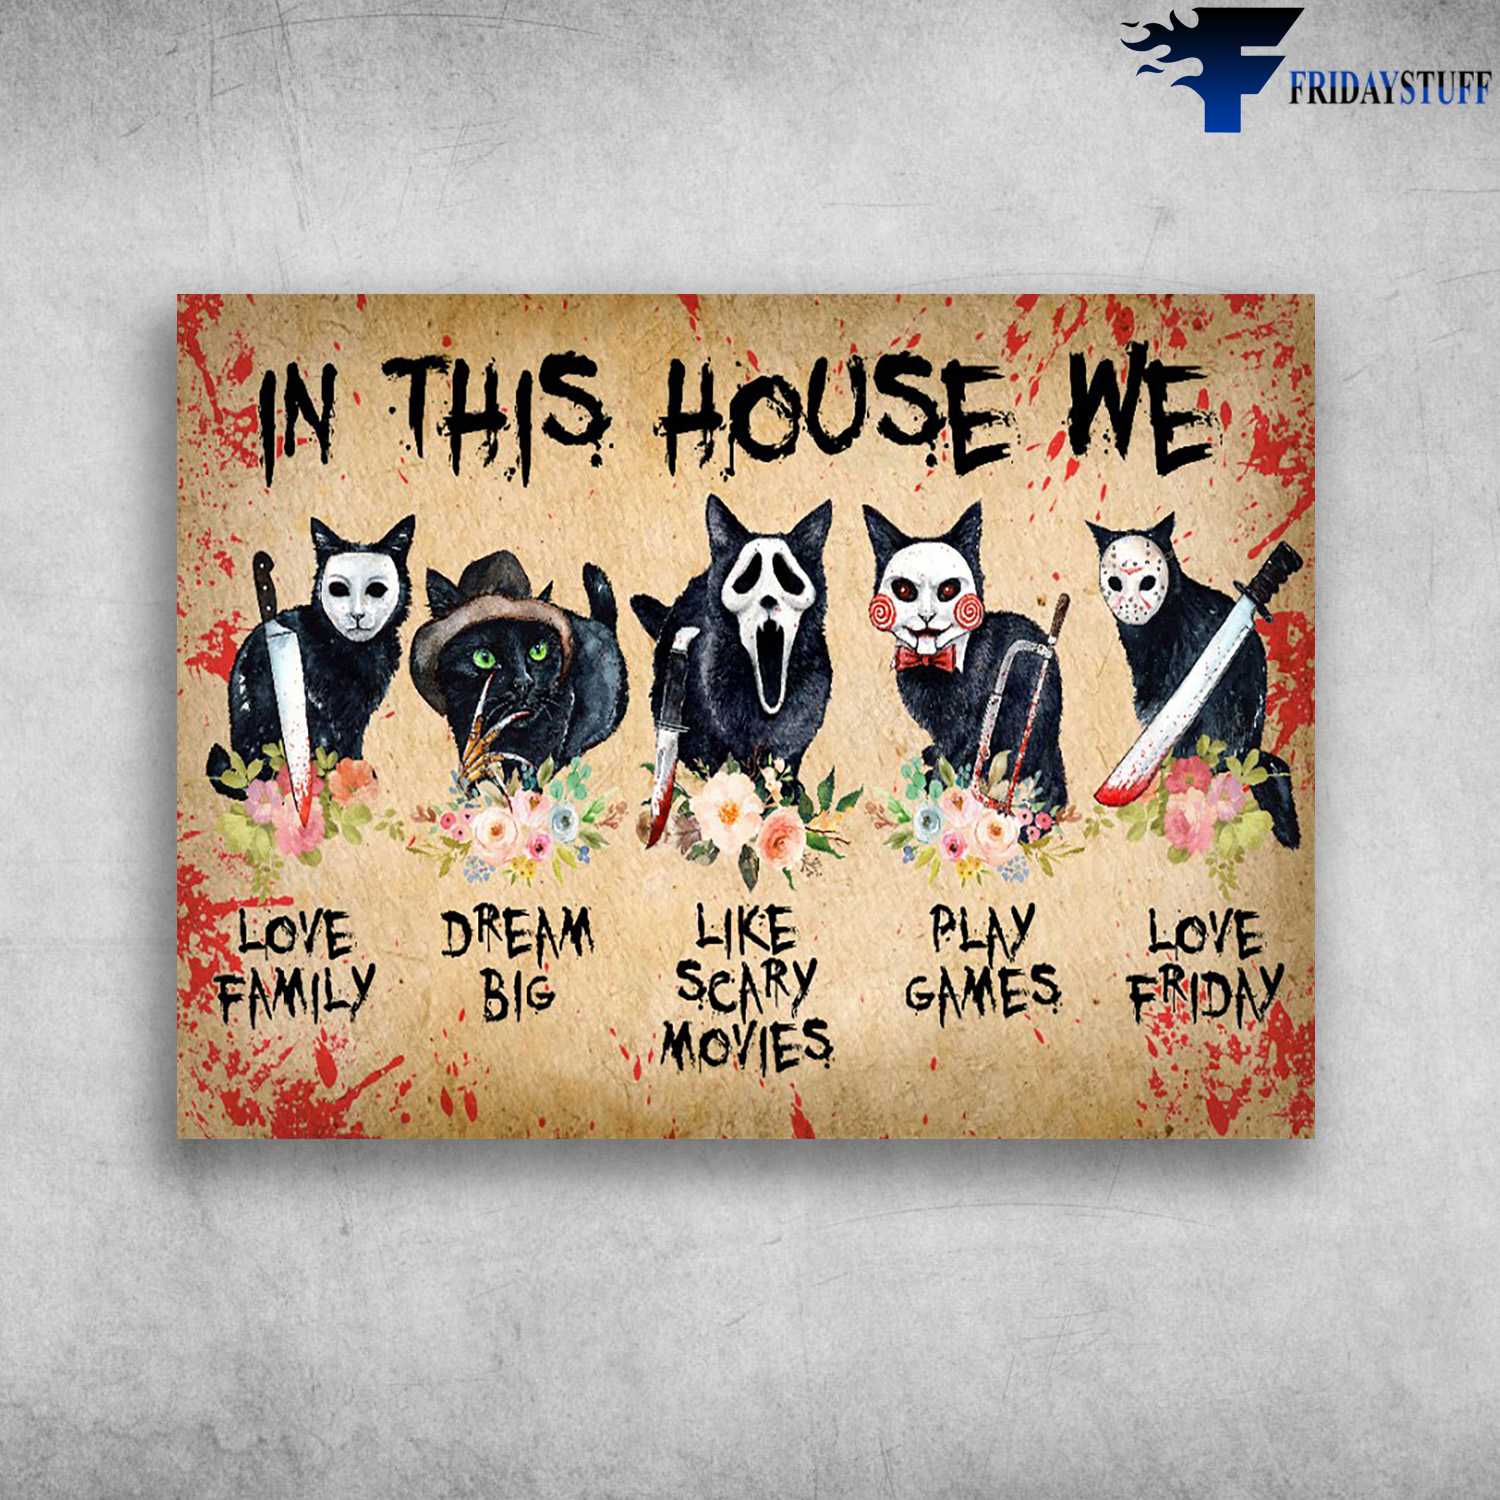 Halloween Black Cat, Horror Movie Characters - In This House, We Love Family, Dream Big, Like Scary Movies, Play Games, Love Friday